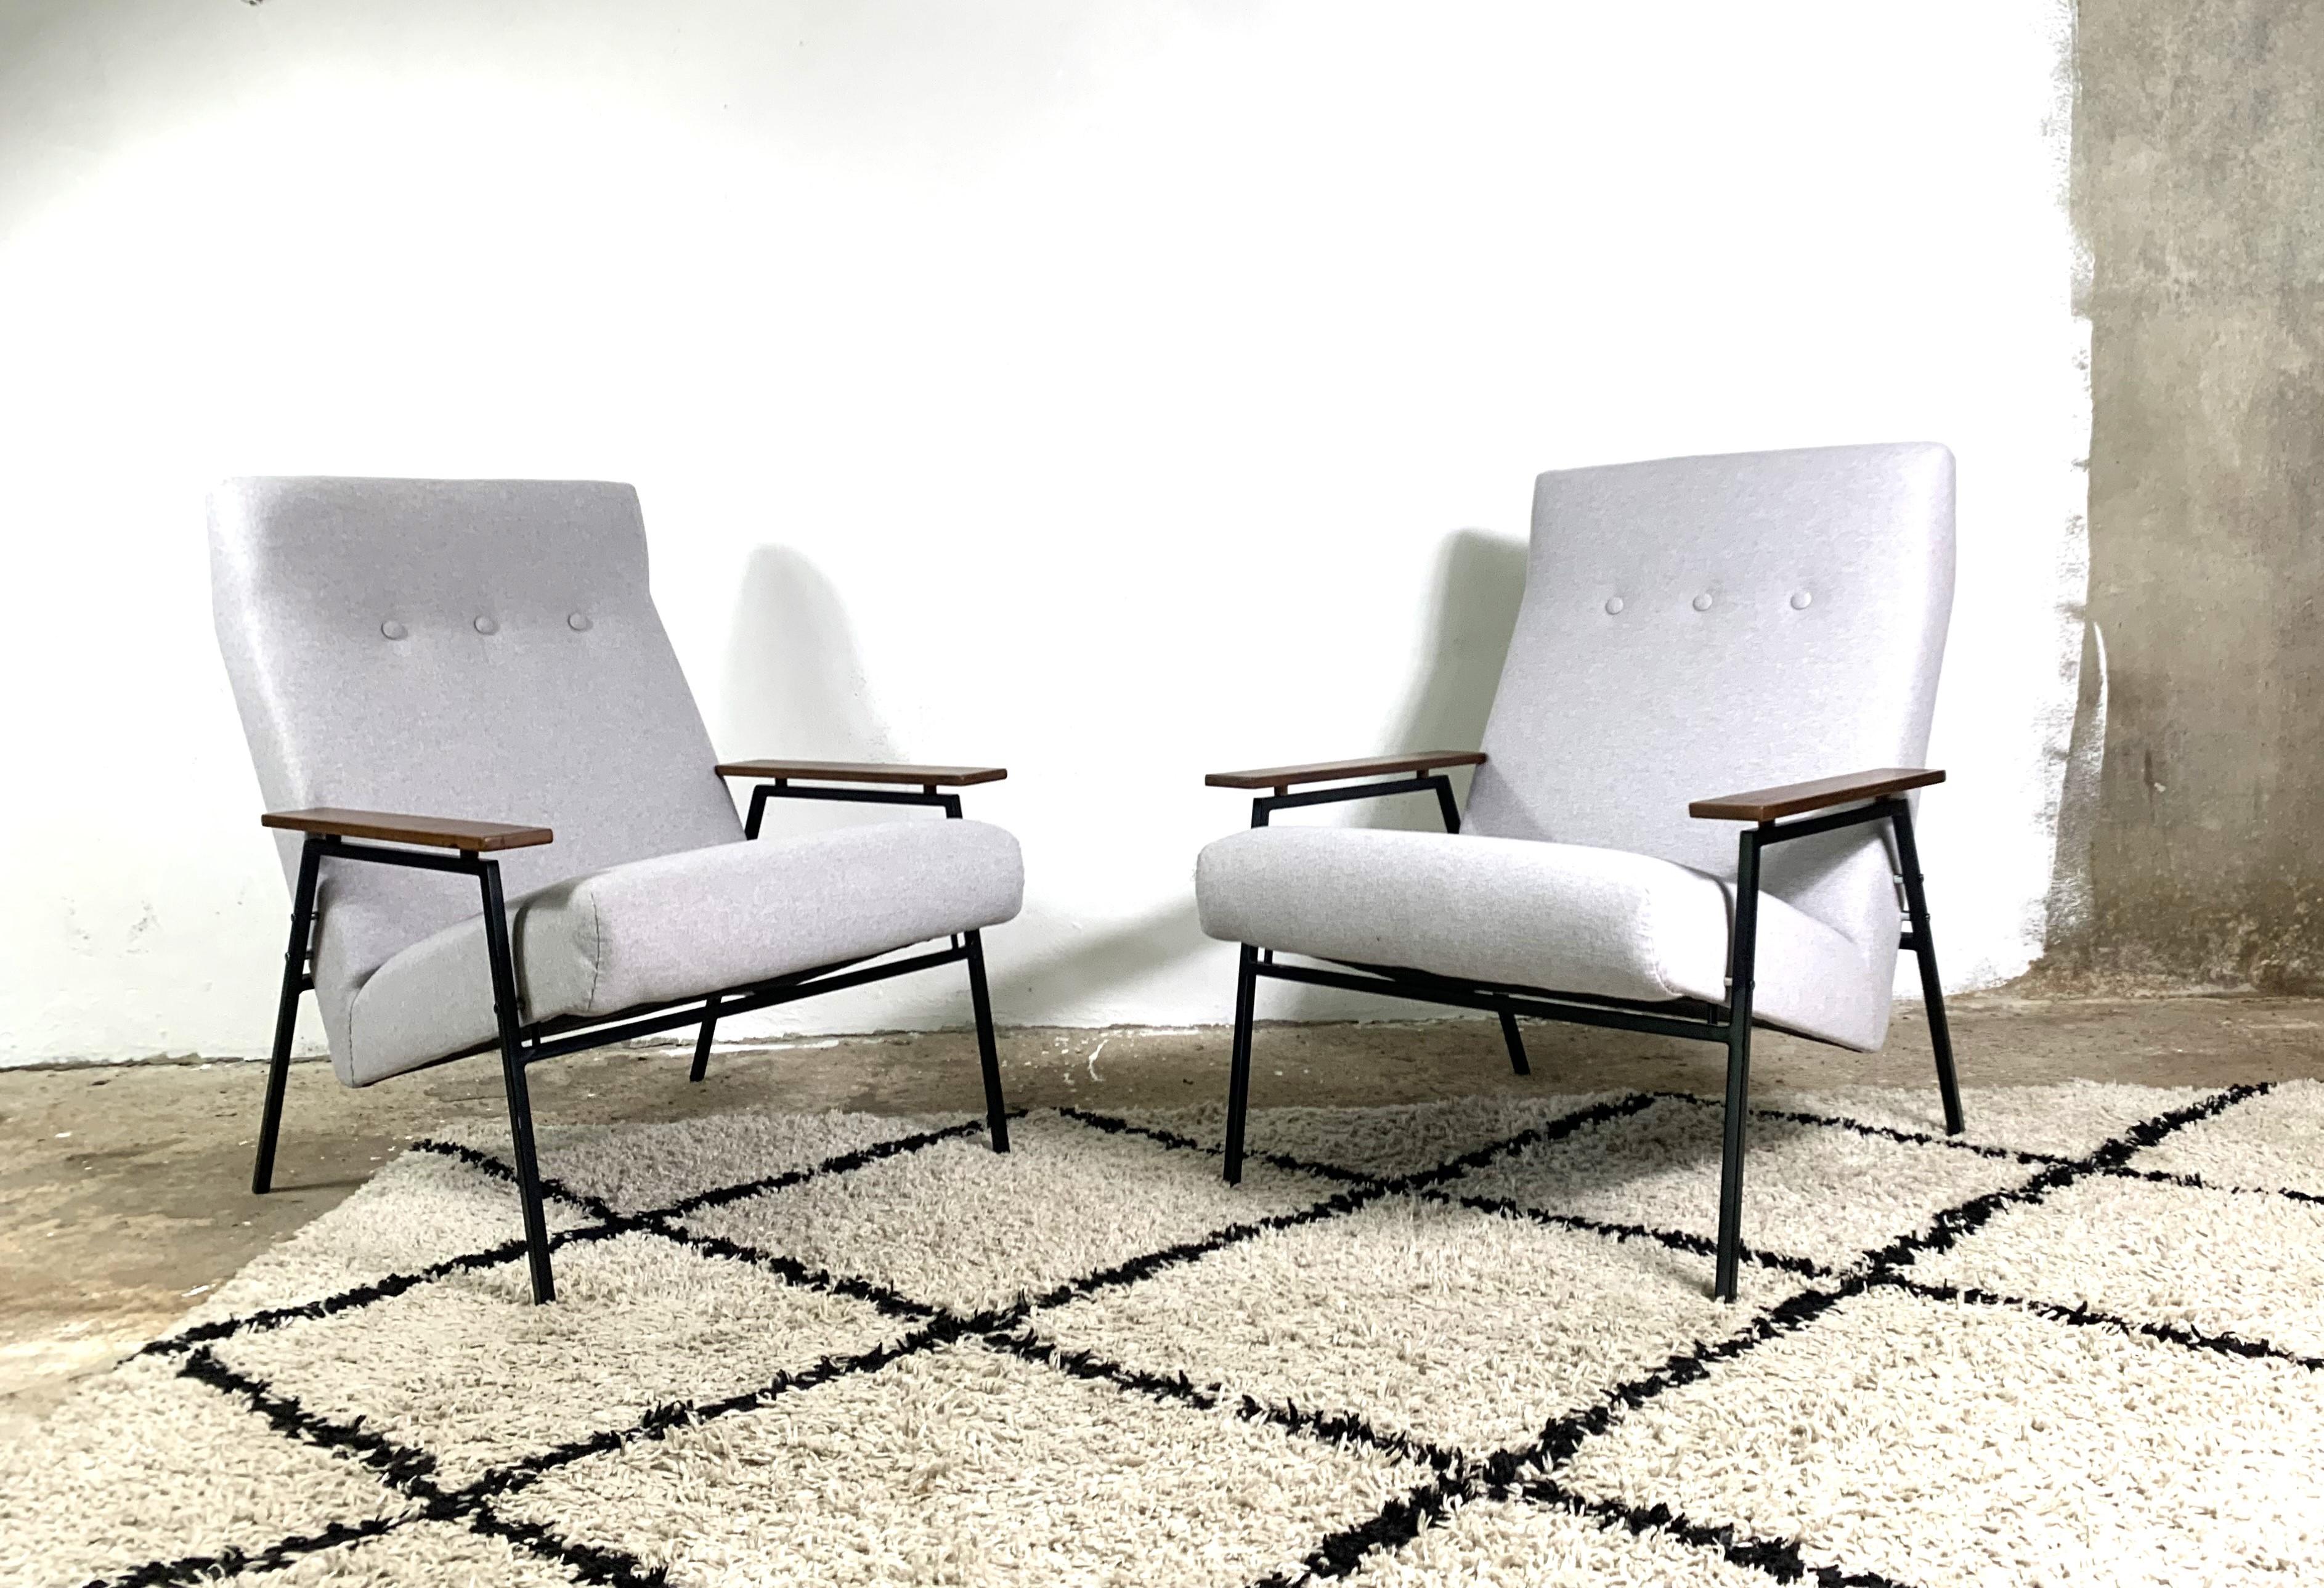 Rare minimalistic armchair, thin black metal frame, wooden wallnut armrests and new upholstery. The designed by Rob Parry for Gelderland, 1950’s (early version of the Lotus or 1611 armchair). Very good condition., comfortable and stylish.